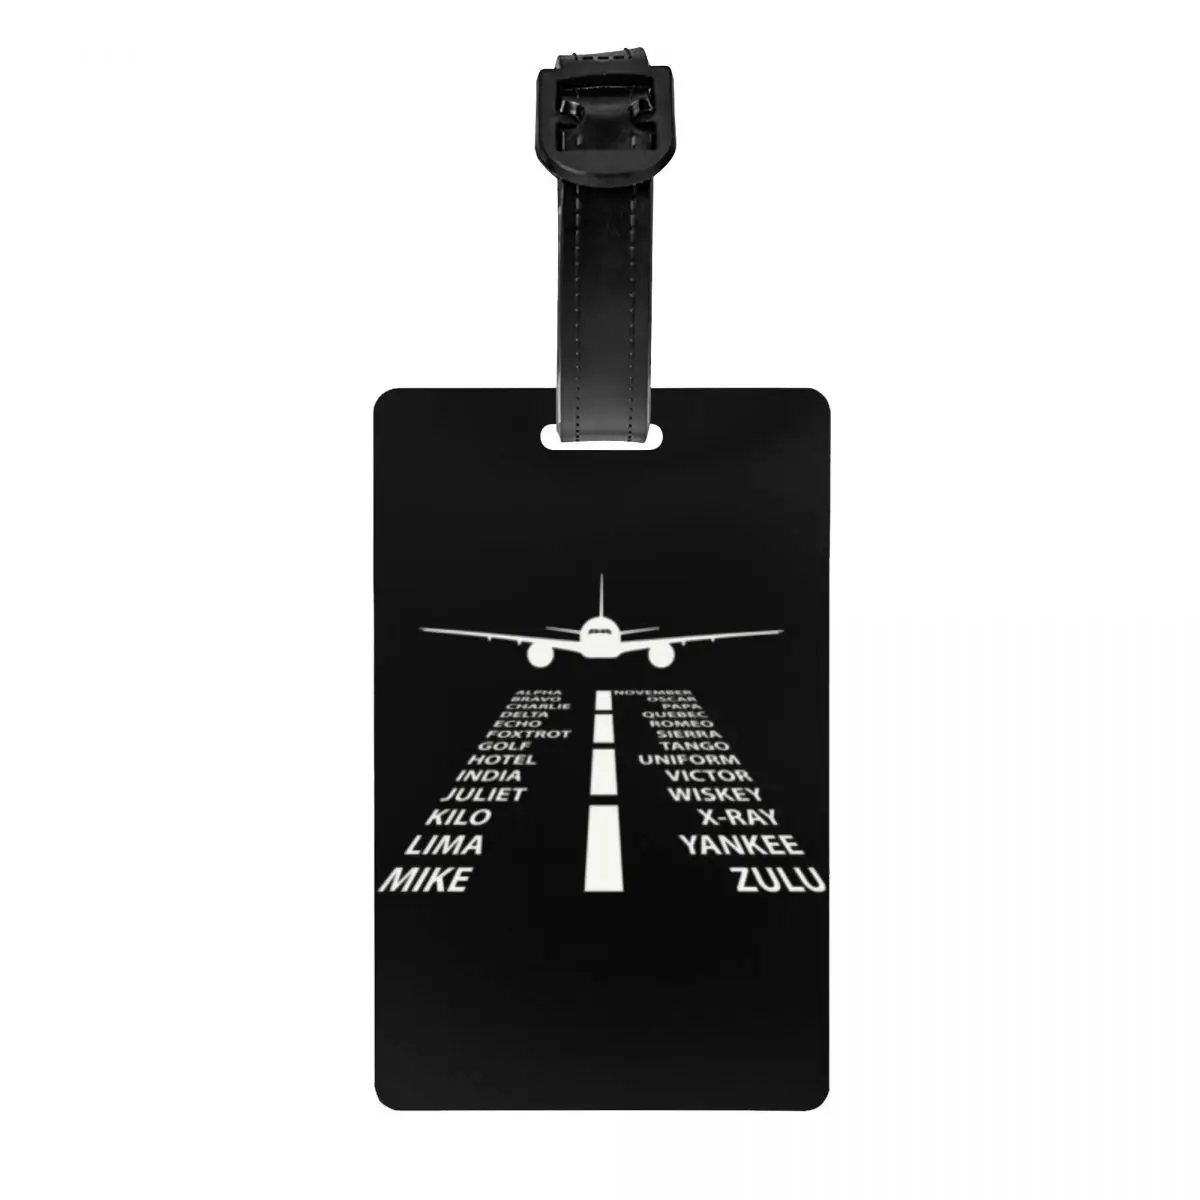 Phonetic Alphabet Pilot Airplane Luggage Tags for Suitcases Fashion Aviation Plane Fighter Baggage Tags Privacy Cover ID Label